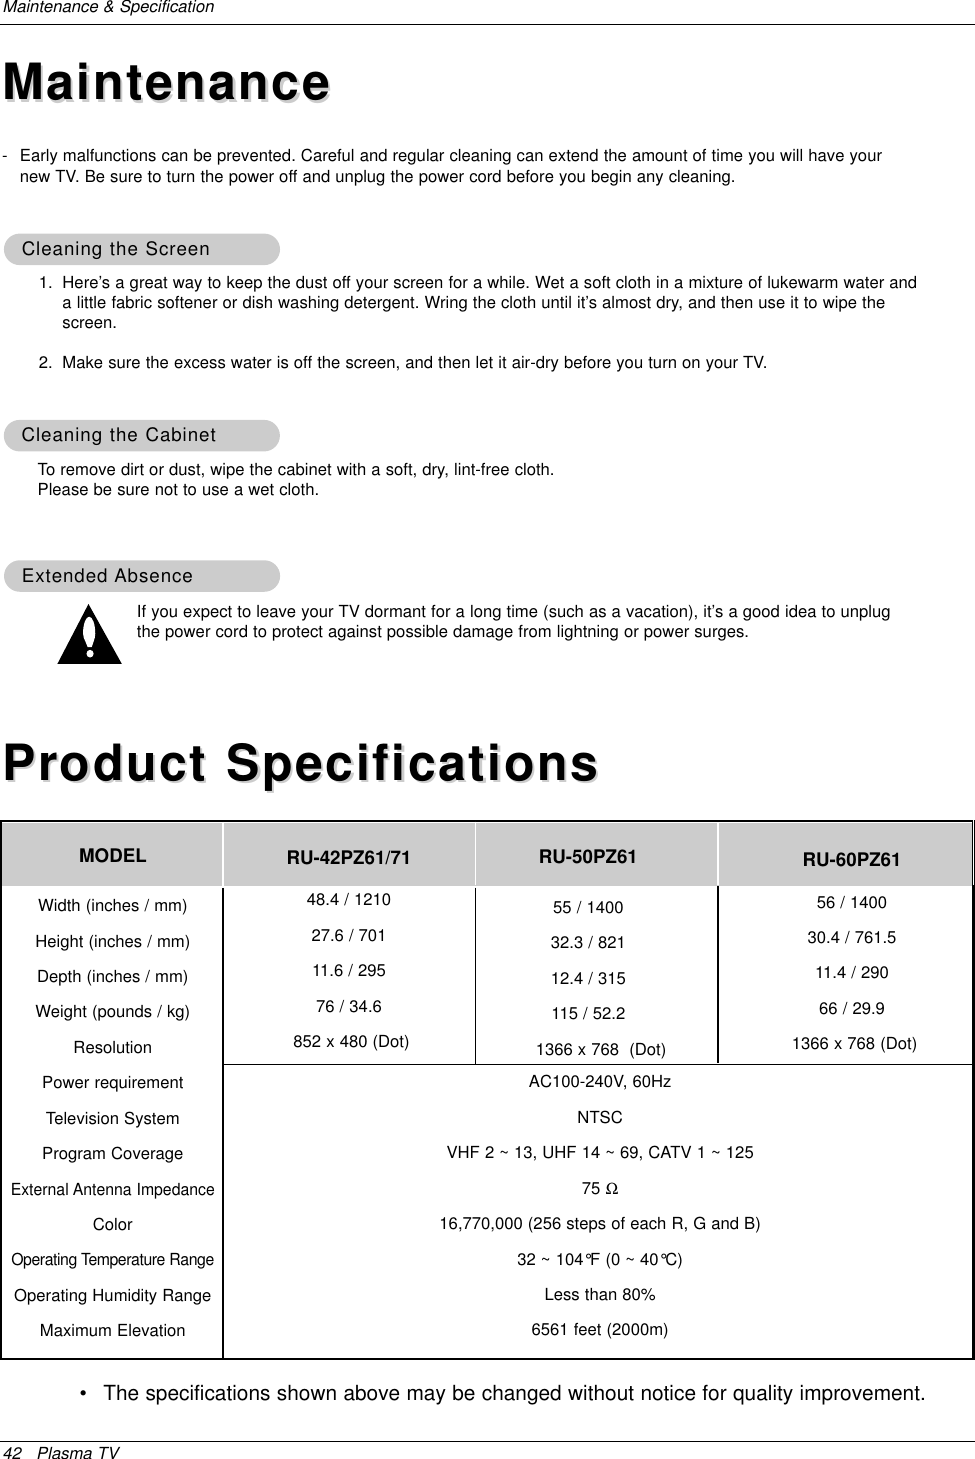 42 Plasma TVMaintenance &amp; SpecificationProduct SpecificationsProduct Specifications•The specifications shown above may be changed without notice for quality improvement.MODEL RU-50PZ6155 / 140032.3 / 82112.4 / 315115 / 52.21366 x 768  (Dot) AC100-240V, 60HzNTSCVHF 2 ~ 13, UHF 14 ~ 69, CATV 1 ~ 12575 Ω16,770,000 (256 steps of each R, G and B)32 ~ 104°F (0 ~ 40°C)Less than 80%6561 feet (2000m)Width (inches / mm)Height (inches / mm)Depth (inches / mm)Weight (pounds / kg)ResolutionPower requirementTelevision SystemProgram CoverageExternal Antenna ImpedanceColorOperating Temperature RangeOperating Humidity RangeMaximum Elevation1. Here’s a great way to keep the dust off your screen for a while. Wet a soft cloth in a mixture of lukewarm water anda little fabric softener or dish washing detergent. Wring the cloth until it’s almost dry, and then use it to wipe thescreen.2. Make sure the excess water is off the screen, and then let it air-dry before you turn on your TV.To remove dirt or dust, wipe the cabinet with a soft, dry, lint-free cloth.Please be sure not to use a wet cloth.If you expect to leave your TV dormant for a long time (such as a vacation), it’s a good idea to unplugthe power cord to protect against possible damage from lightning or power surges.- Early malfunctions can be prevented. Careful and regular cleaning can extend the amount of time you will have yournew TV. Be sure to turn the power off and unplug the power cord before you begin any cleaning.Cleaning the ScreenCleaning the ScreenCleaning the CabinetCleaning the CabinetExtended Extended AbsenceAbsenceMaintenanceMaintenanceRU-42PZ61/7148.4 / 121027.6 / 70111.6 / 29576 / 34.6852 x 480 (Dot) RU-60PZ6156 / 140030.4 / 761.511.4 / 29066 / 29.91366 x 768 (Dot) 